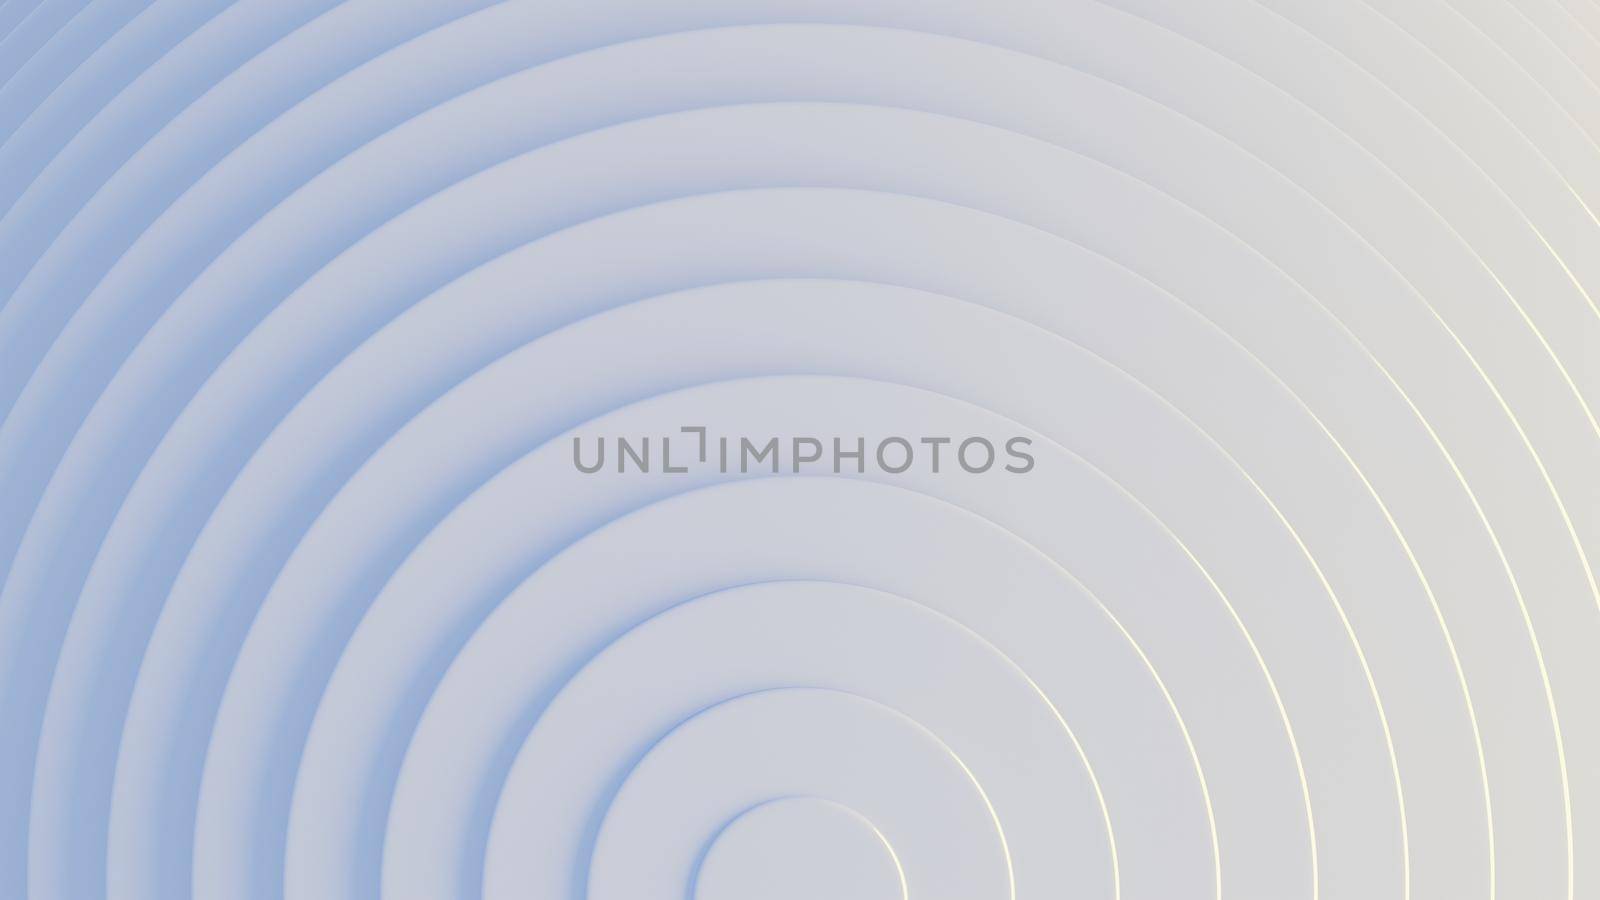 Concentric circles pattern on white and light blue. Clean, unobtrusive abstract background. Digital render.